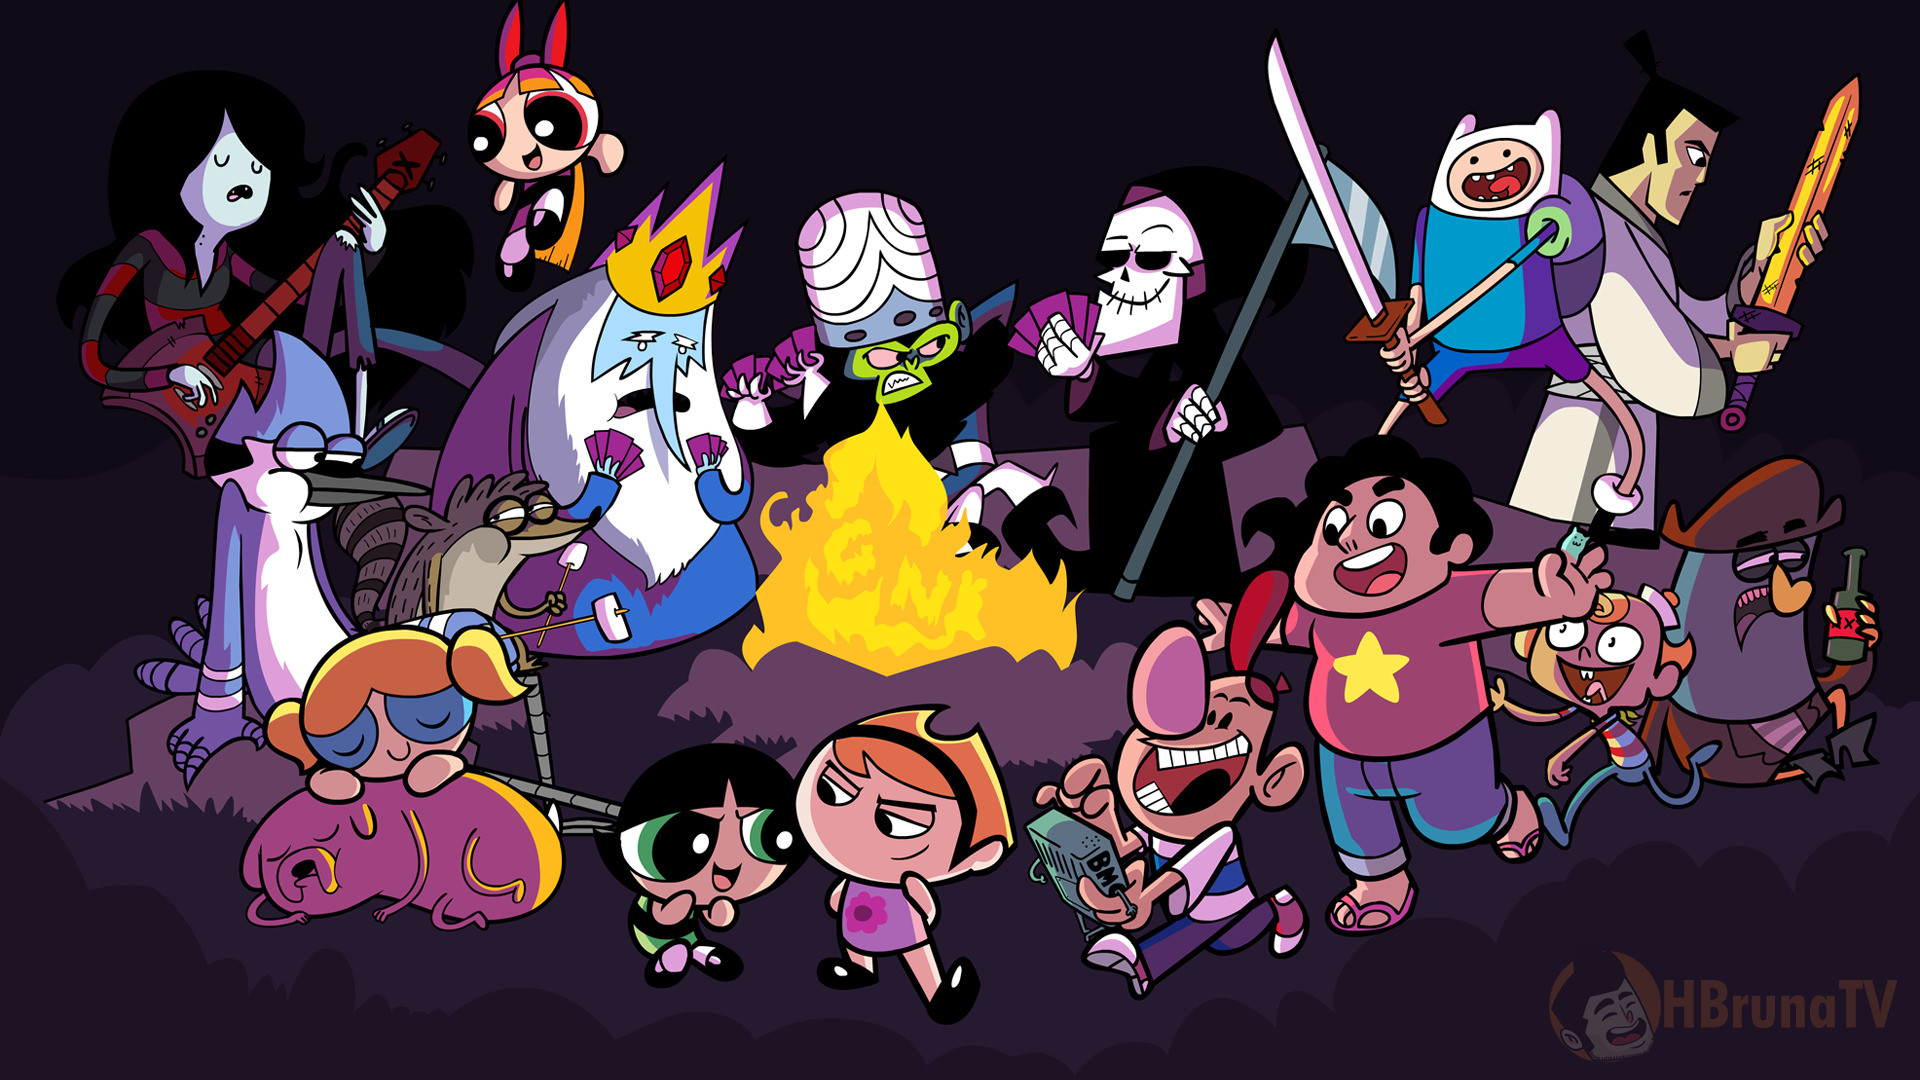 1920x1080 Adventure Time, Steven Universe, The Grim Adventures of Billy and Mandy,  Powerpuff Girls